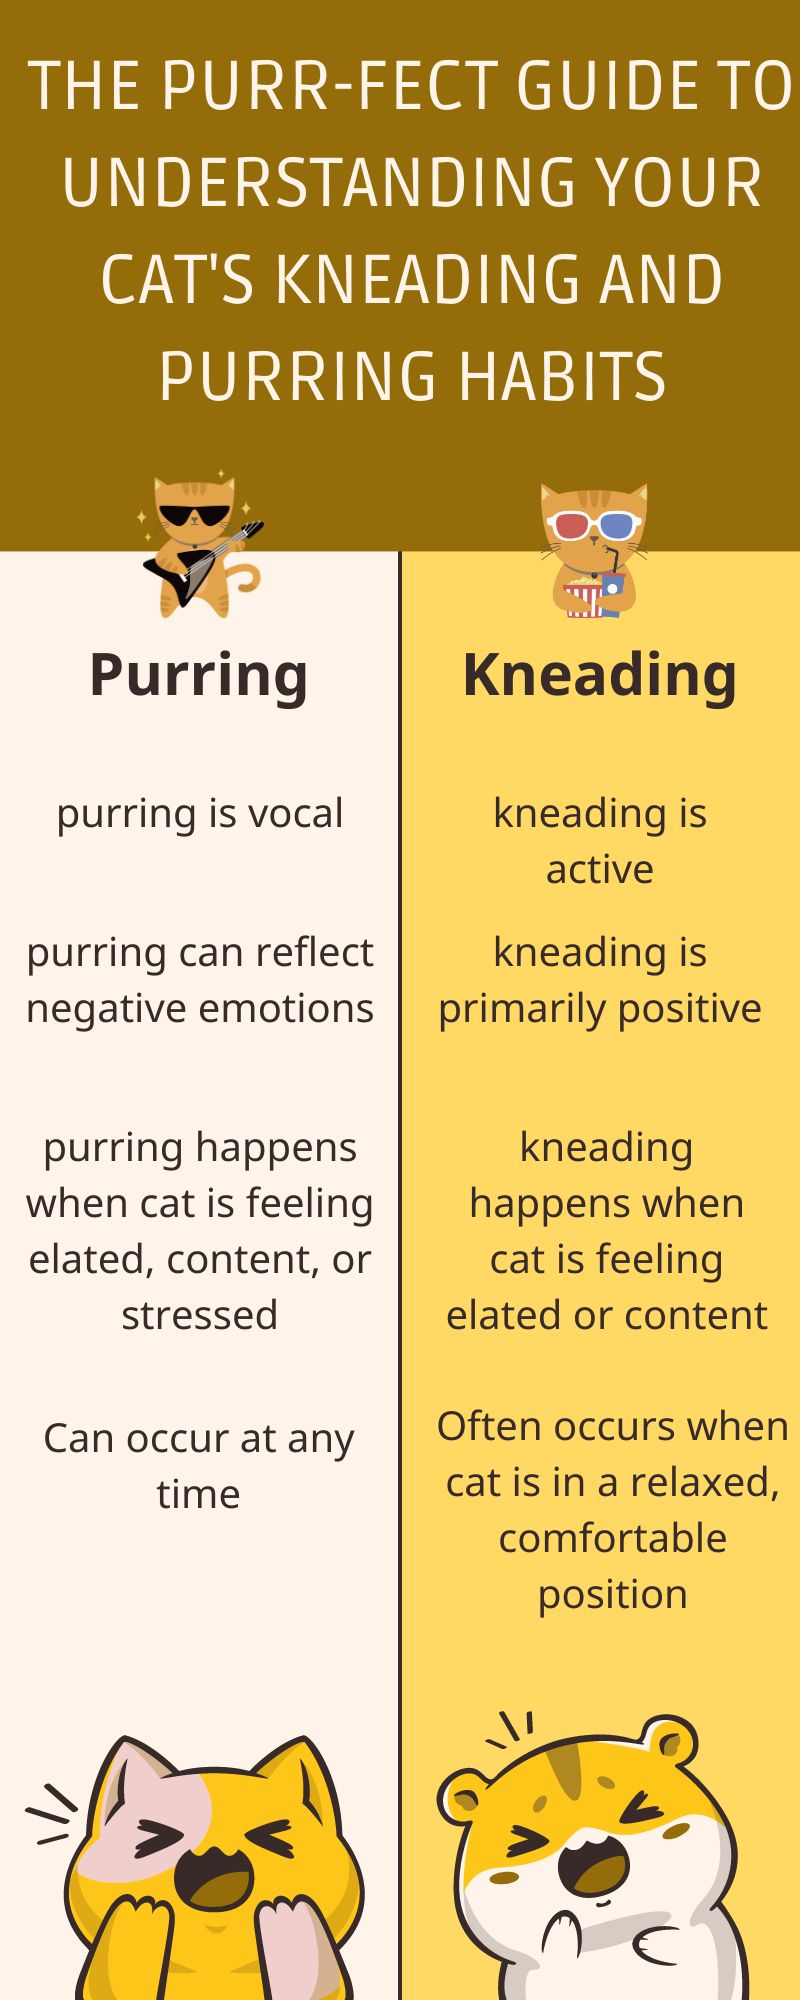 The Purr-fect Guide to Understanding Your Cat's Kneading and Purring Habits